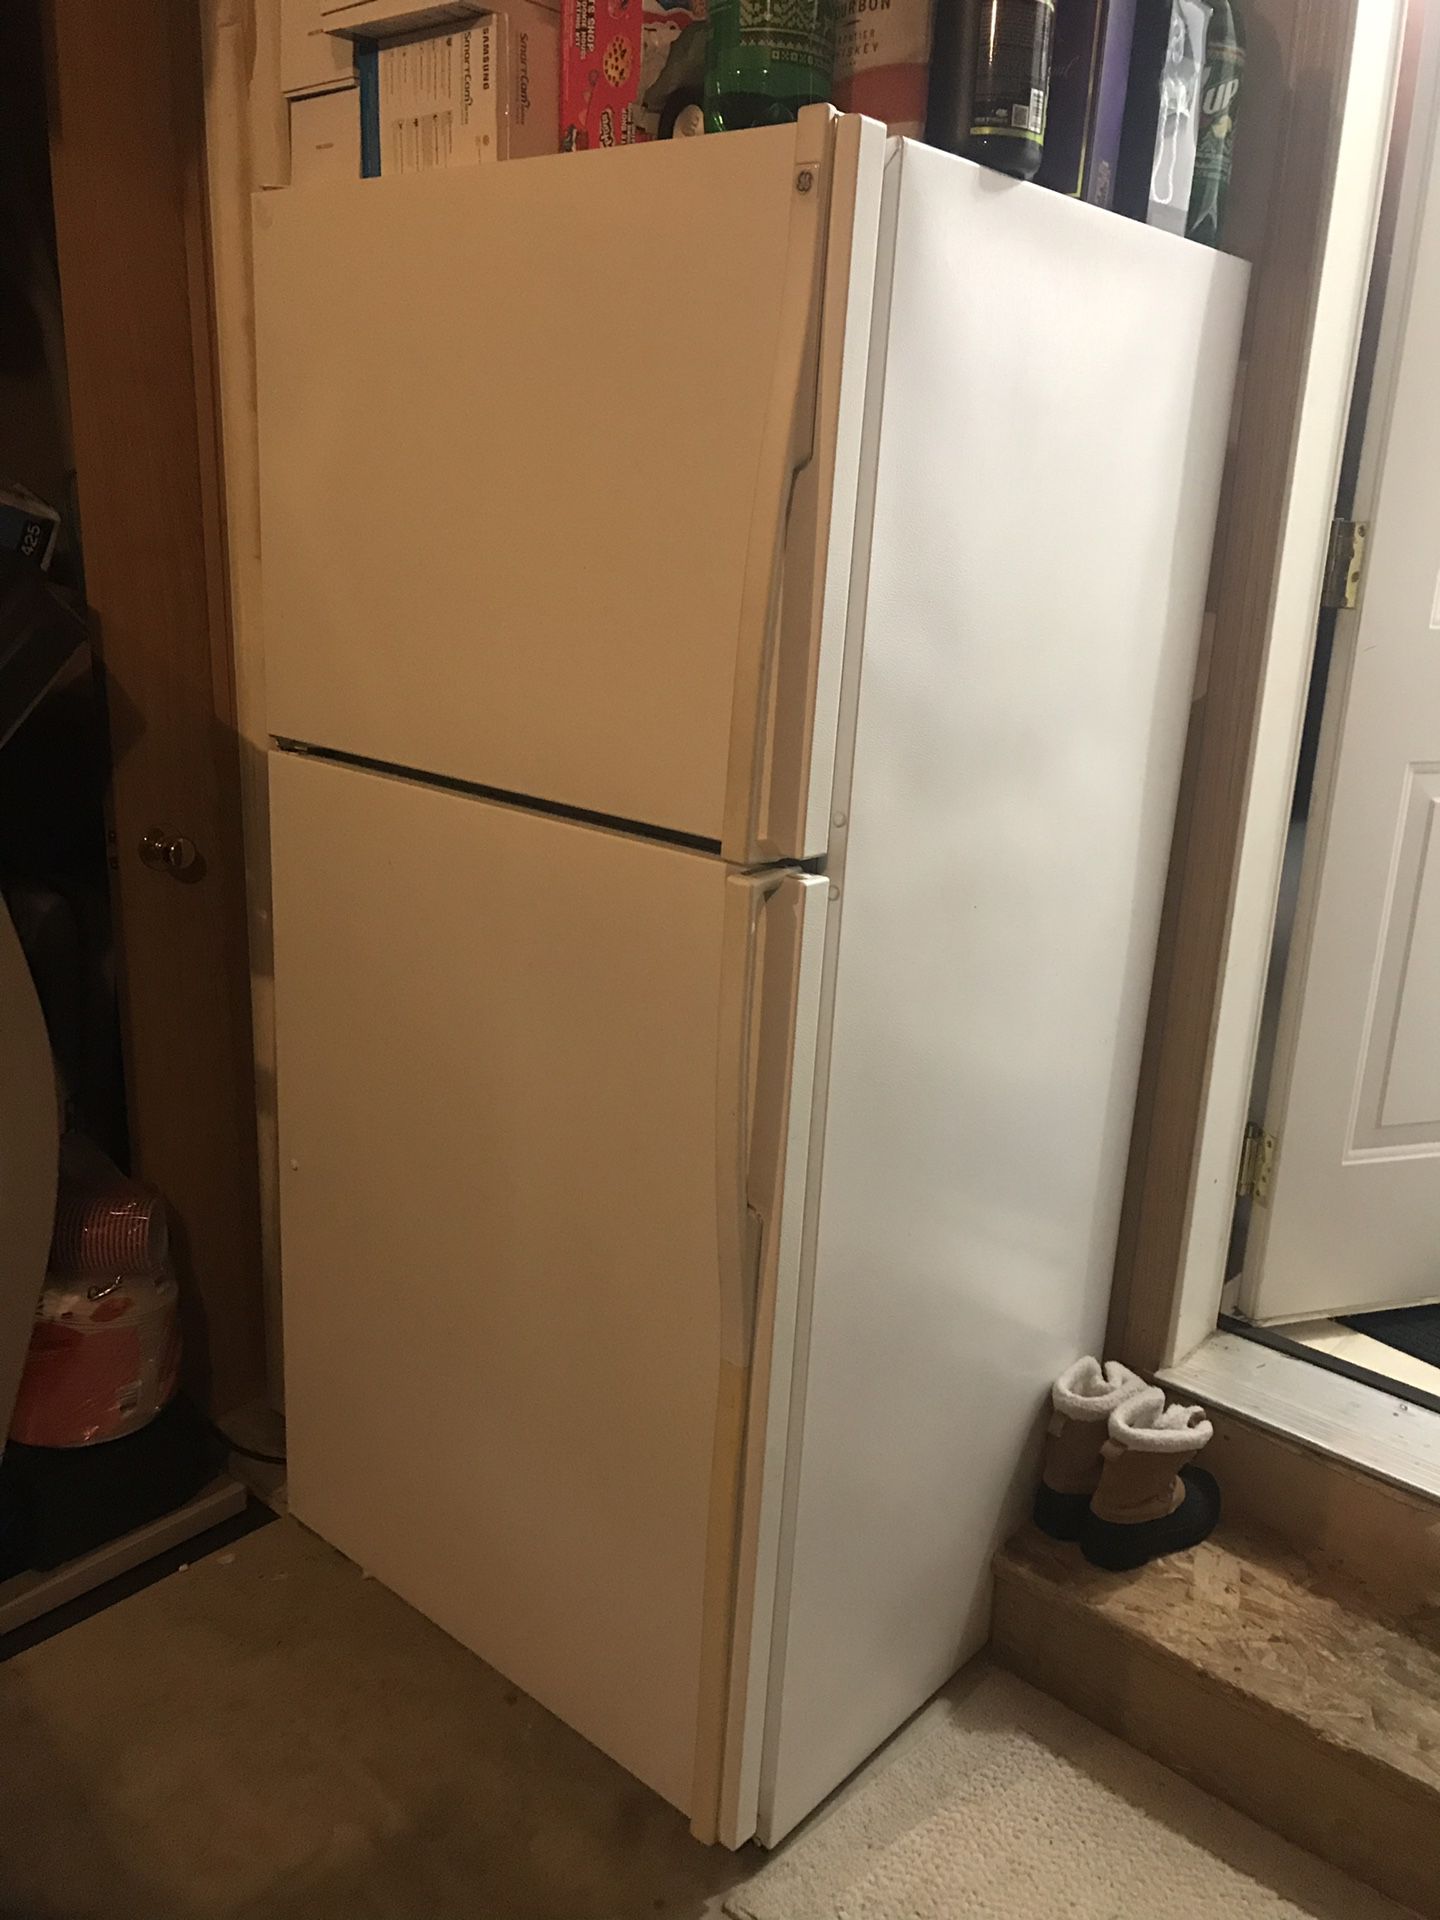 20.6 Cubic Feet GE Refrigerator Freezer with IceMaker - Works great